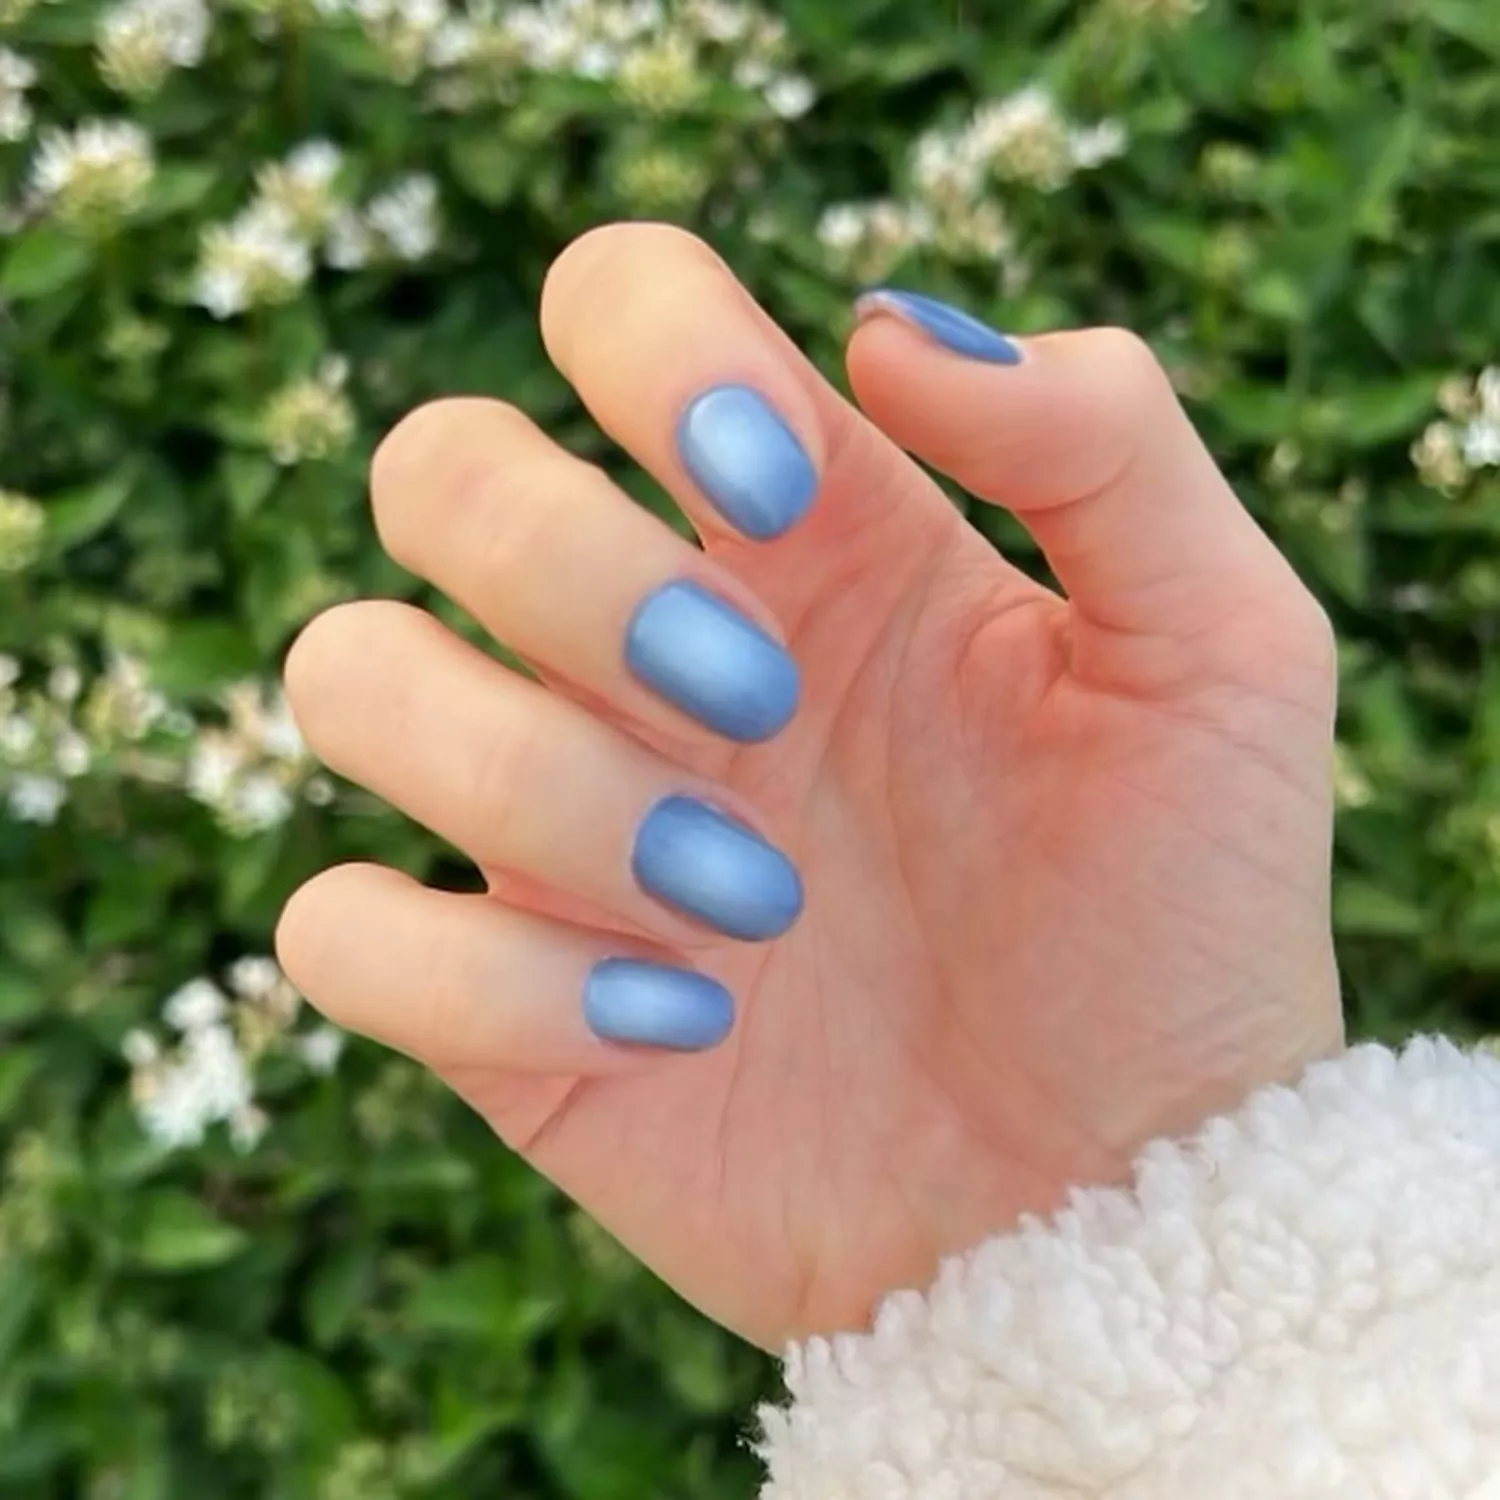 Hazy blue nails by @enamelle.